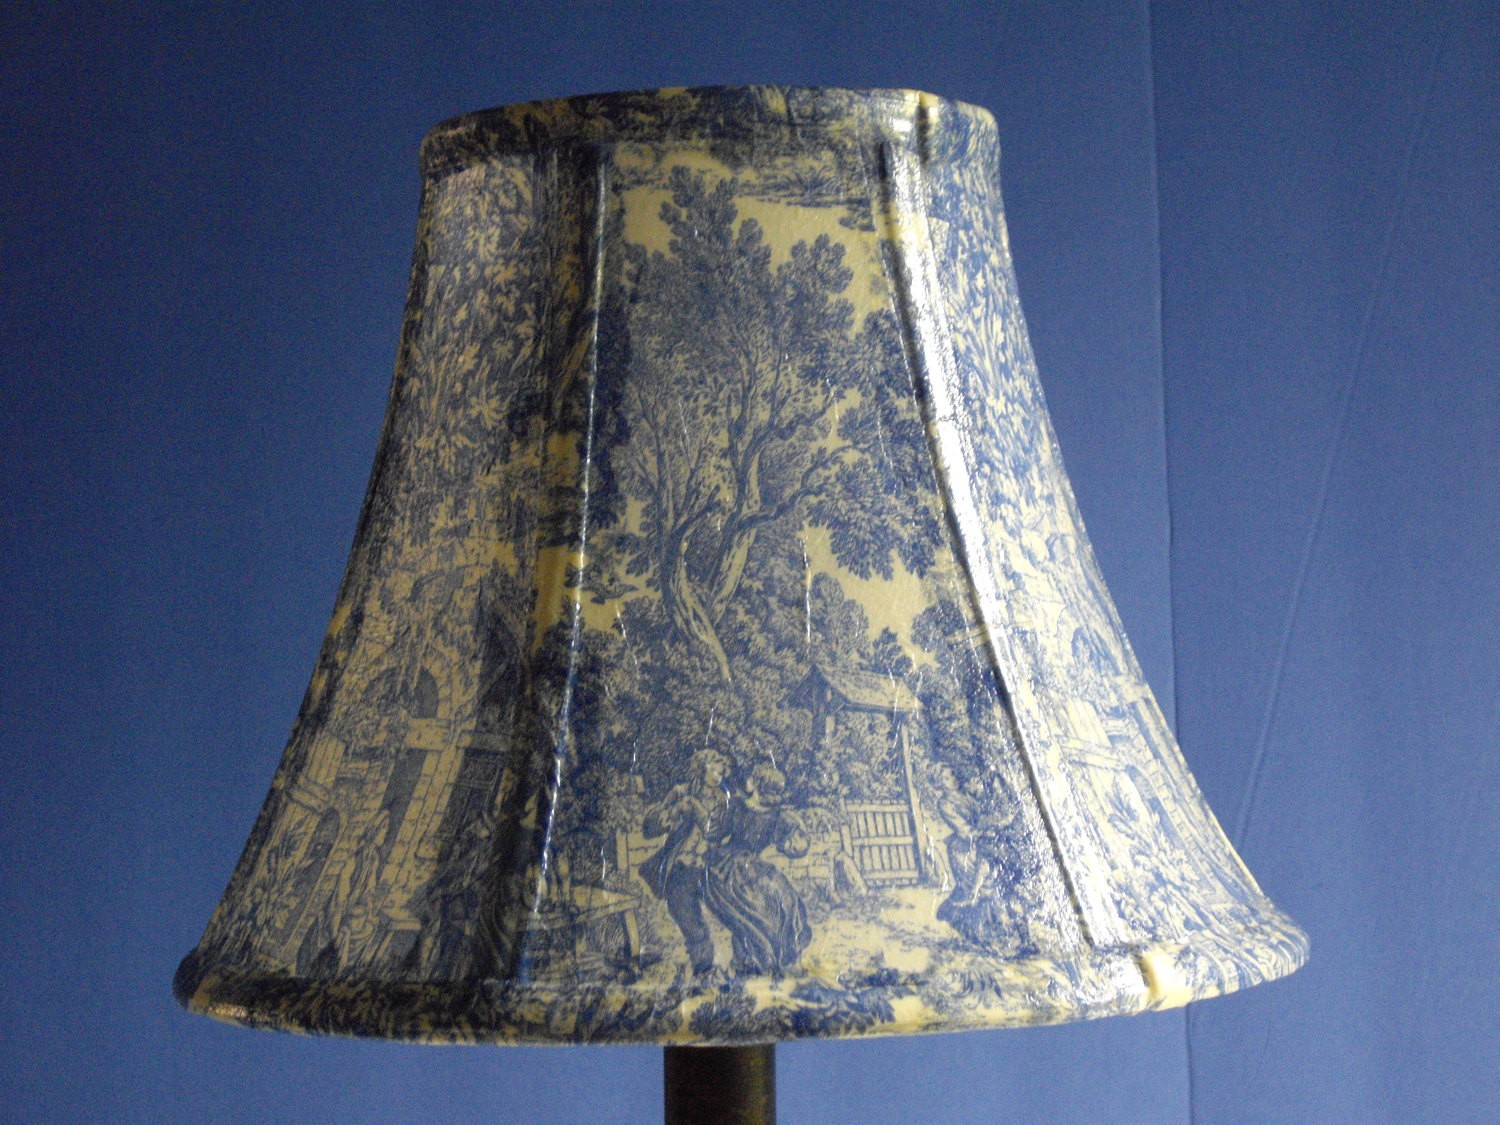 Decoupage lampshade using blue toile